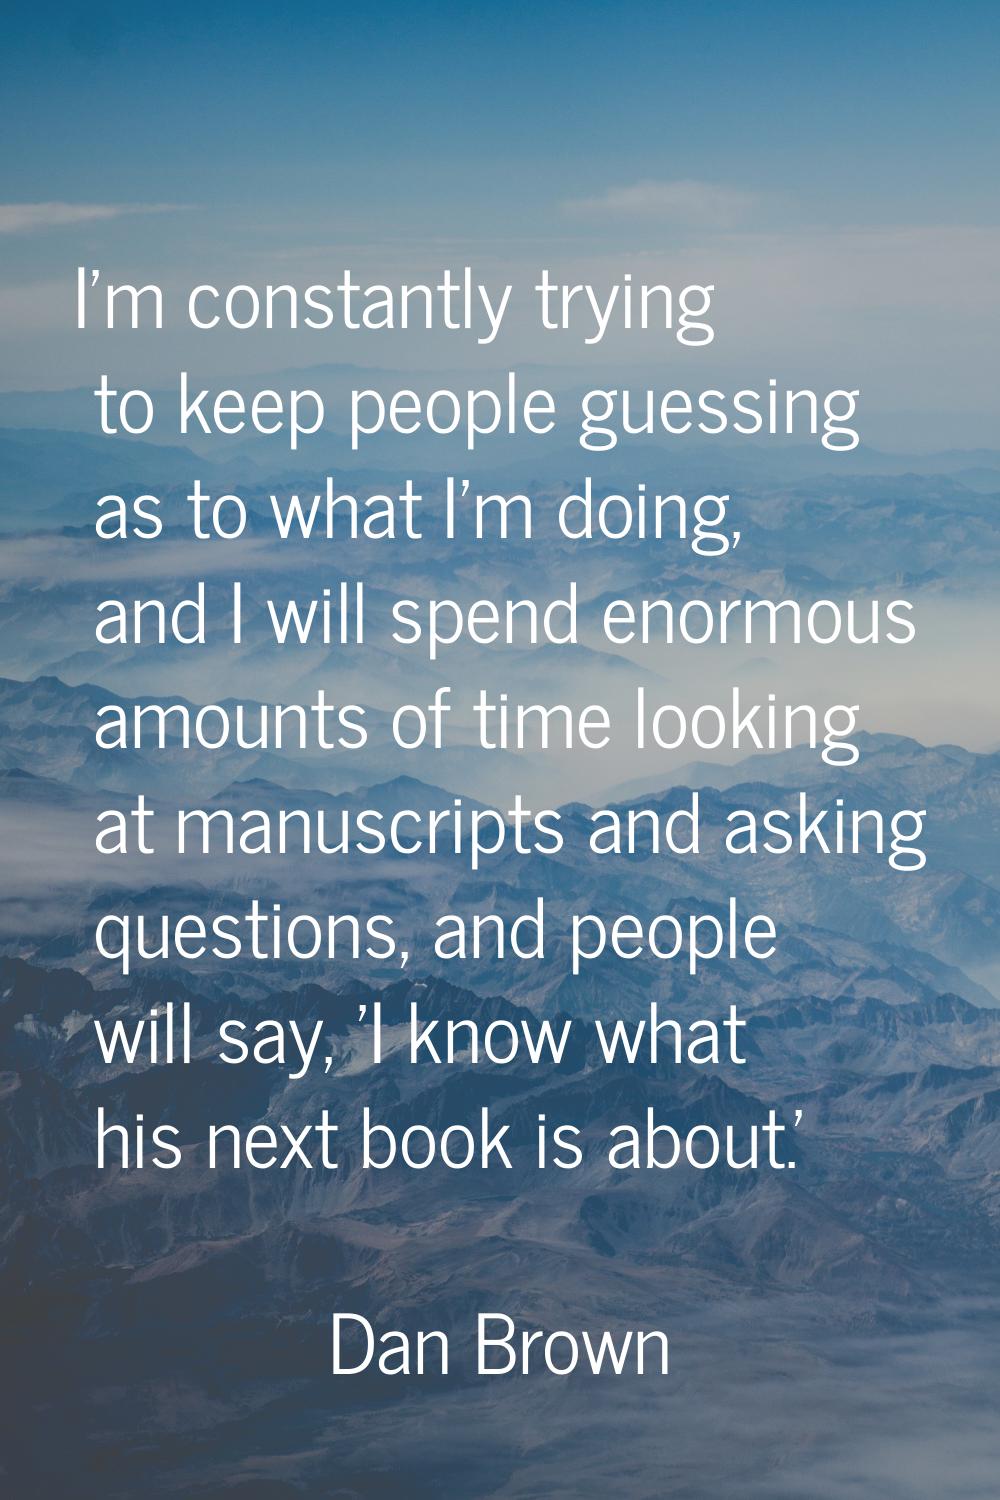 I'm constantly trying to keep people guessing as to what I'm doing, and I will spend enormous amoun